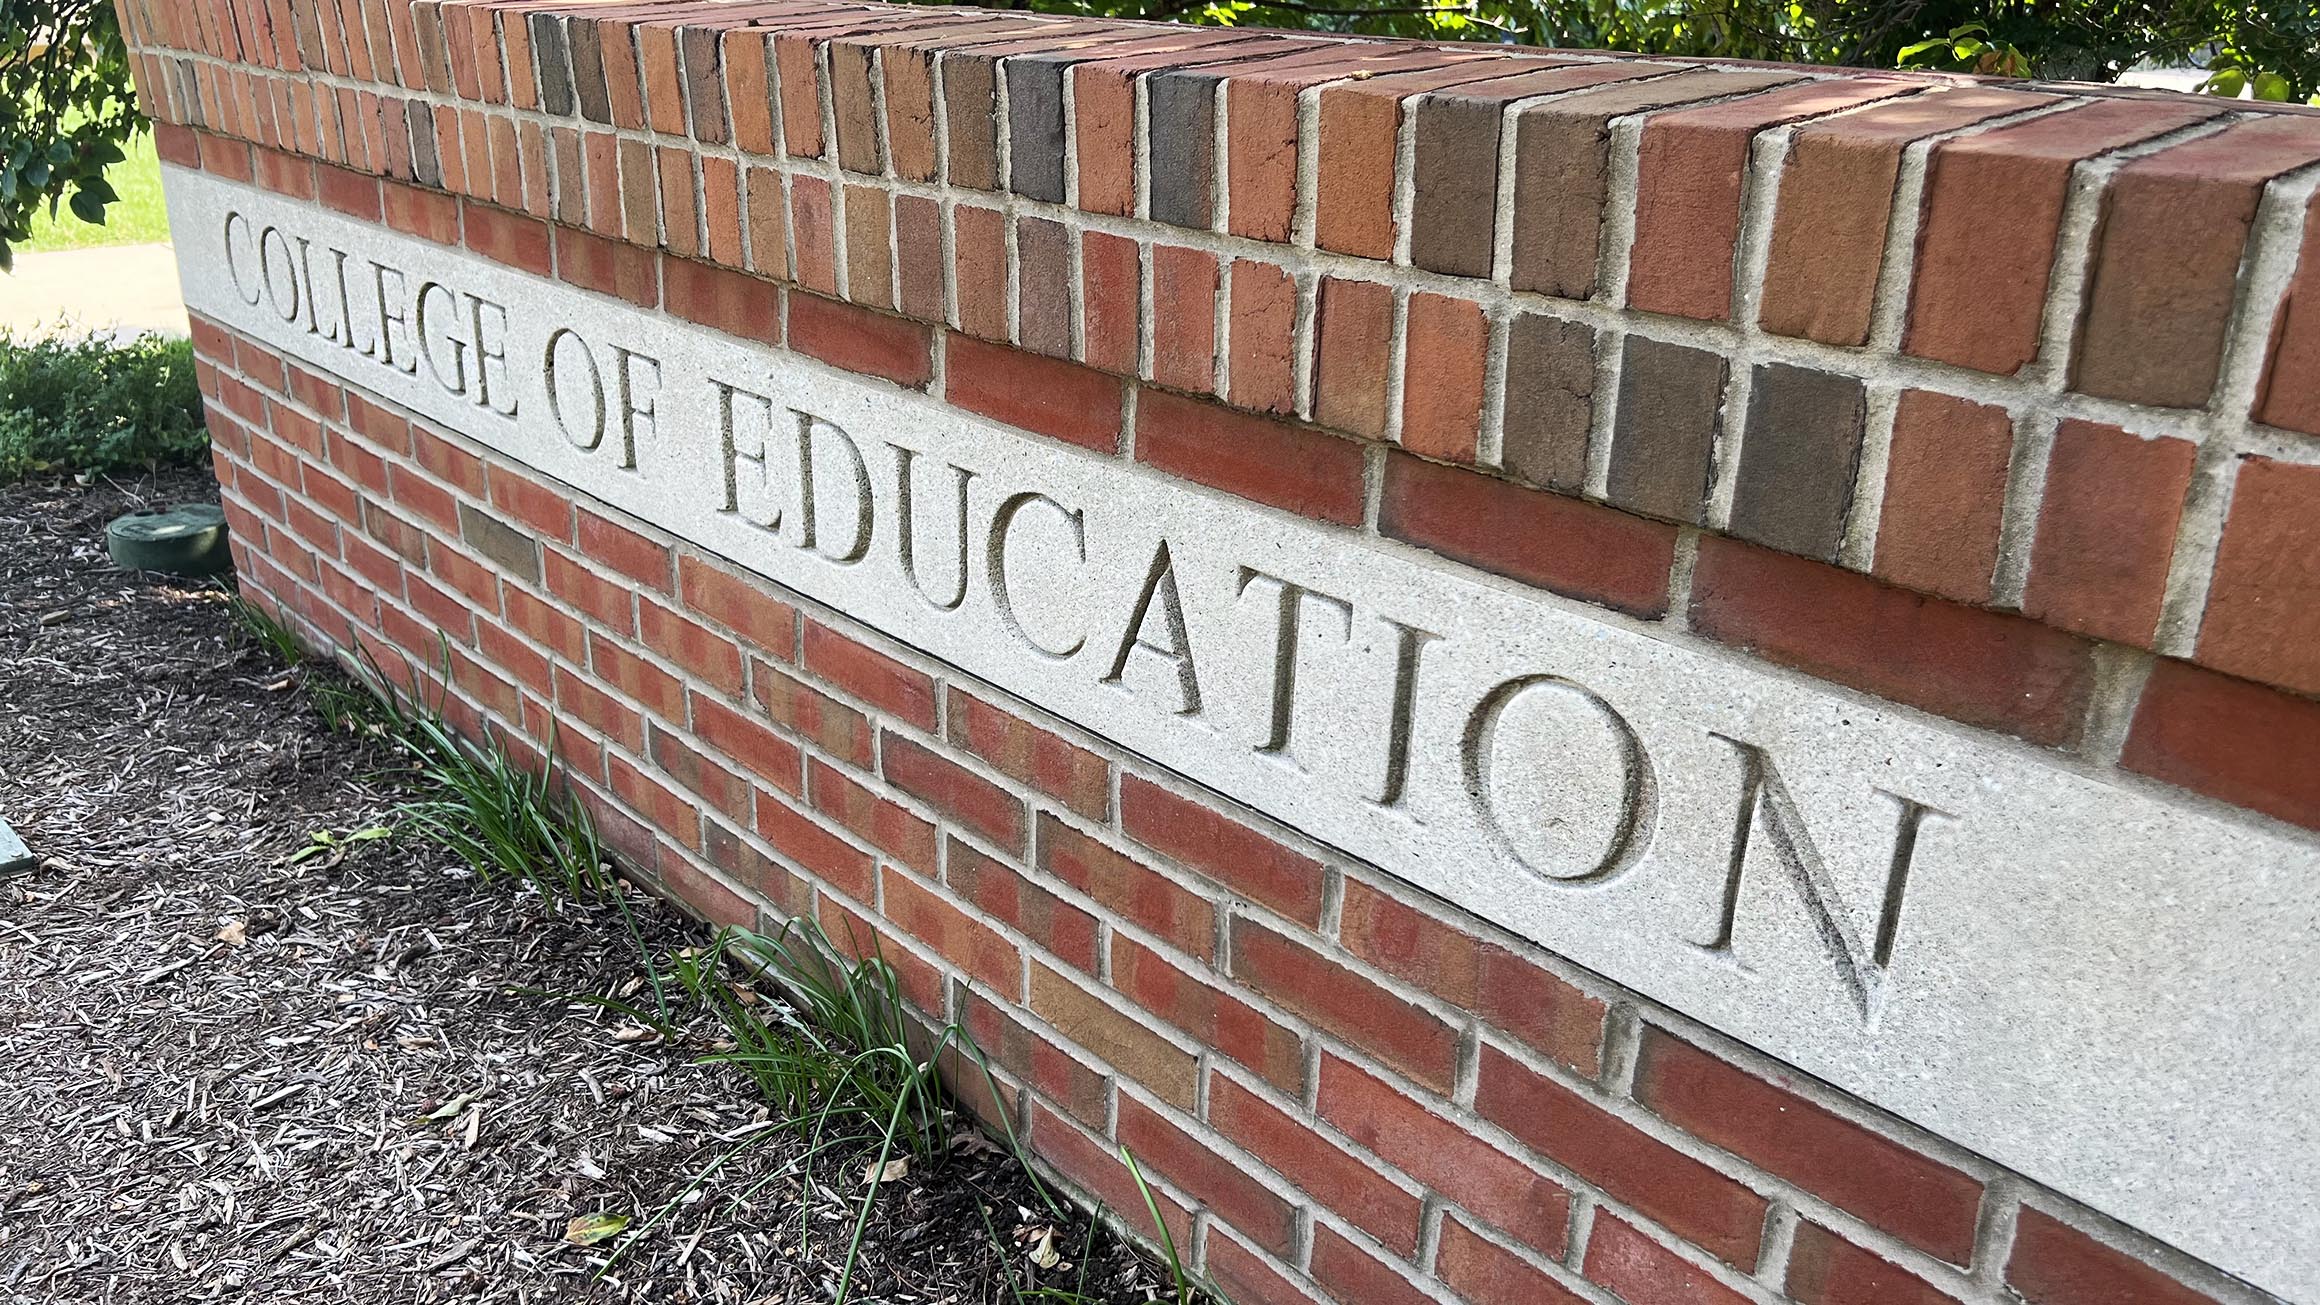 A brick wall has the words 'College of Education' on it